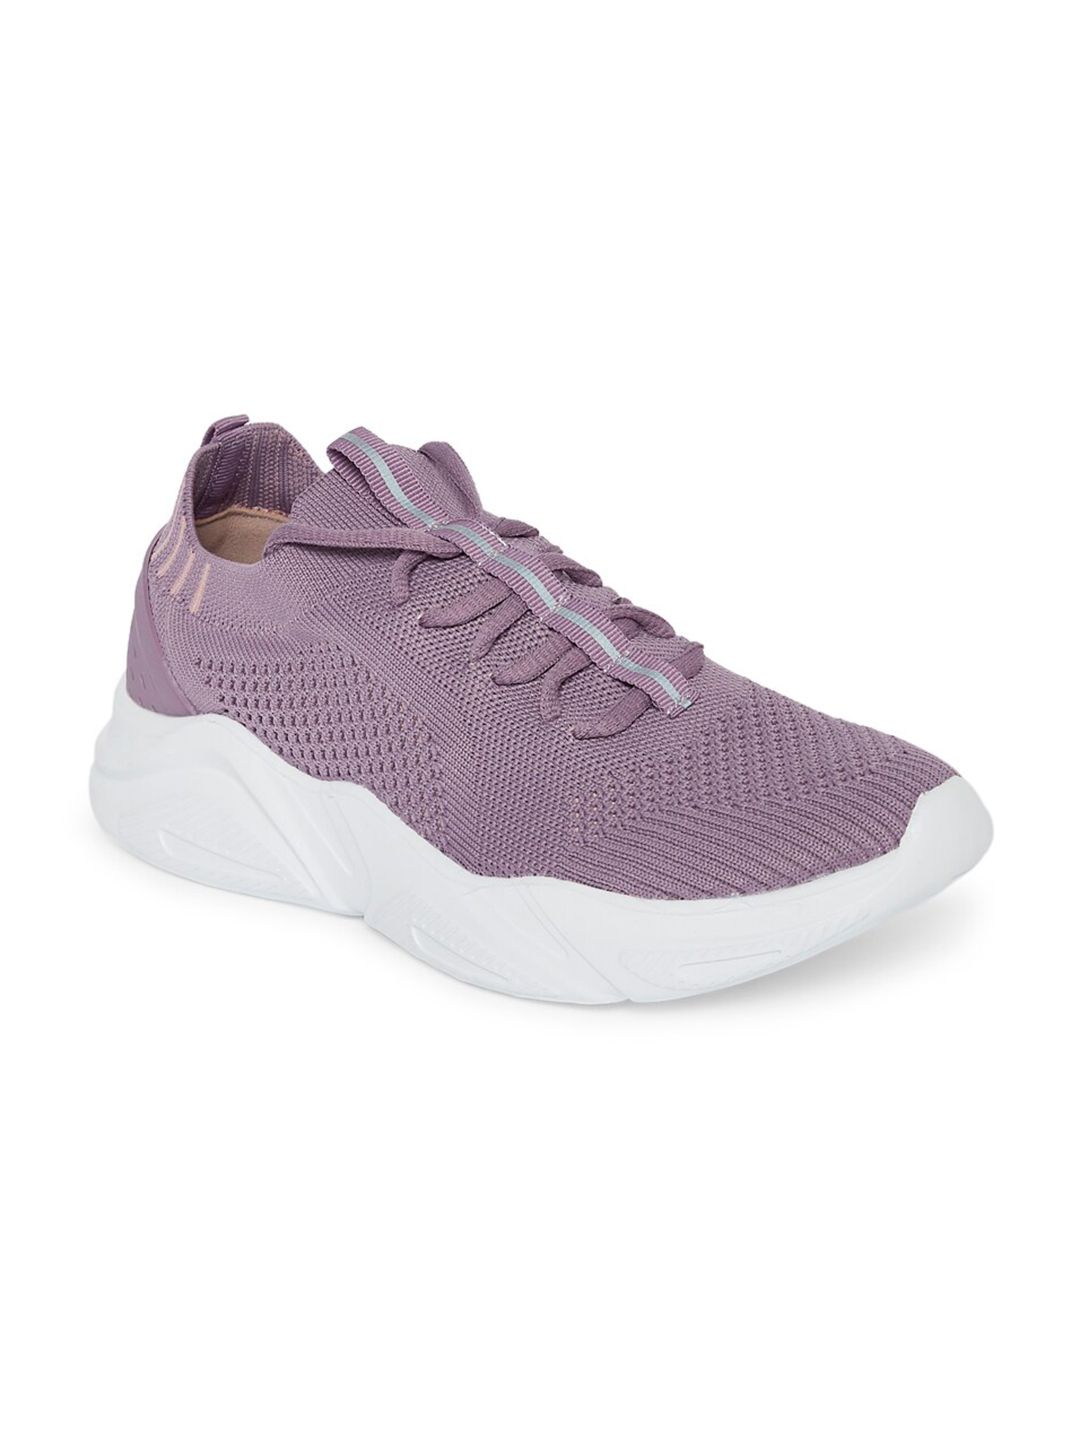 Forever Glam by Pantaloons Women Purple Running Non-Marking Shoes Price in India